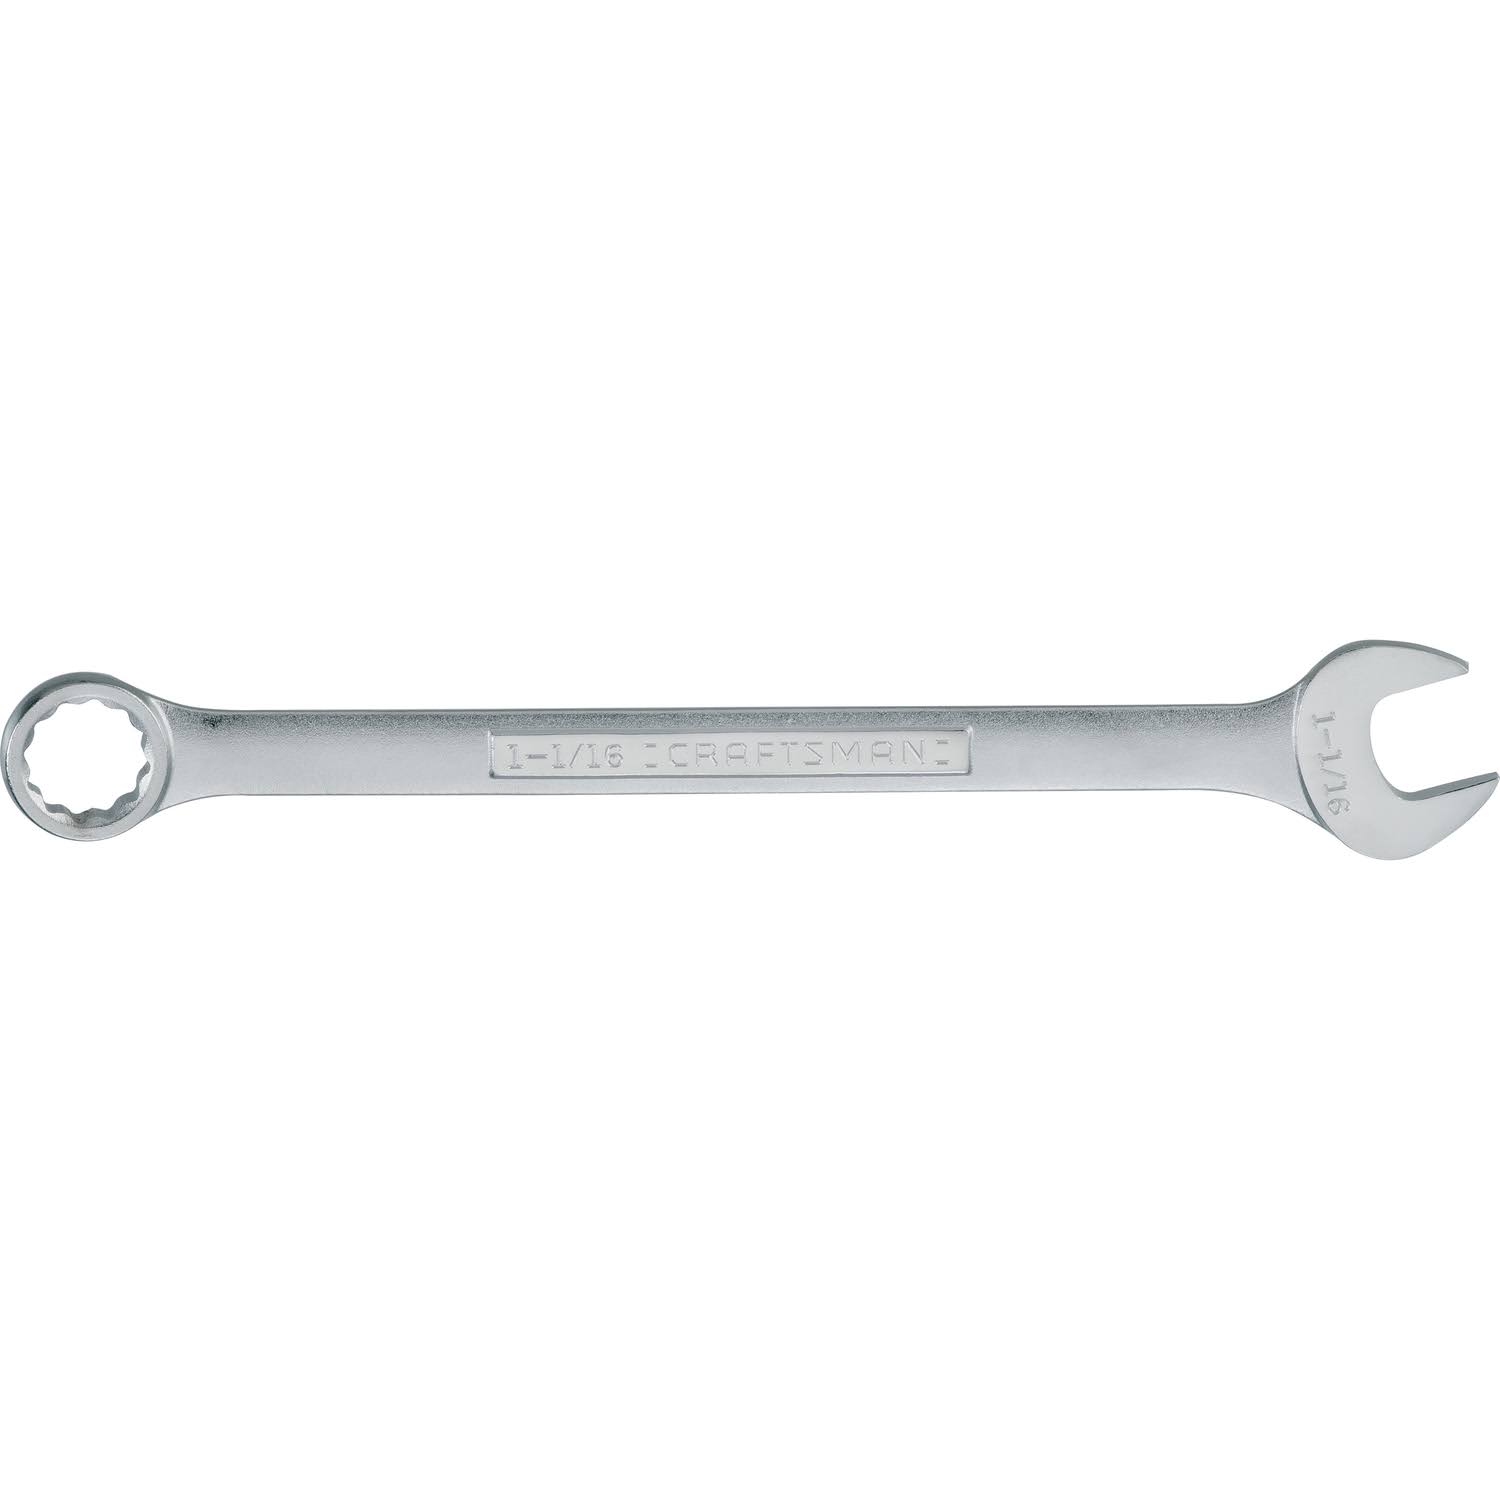 Craftsman Combination Wrench, SAE, 1-1/16-Inch (cmmt44706)